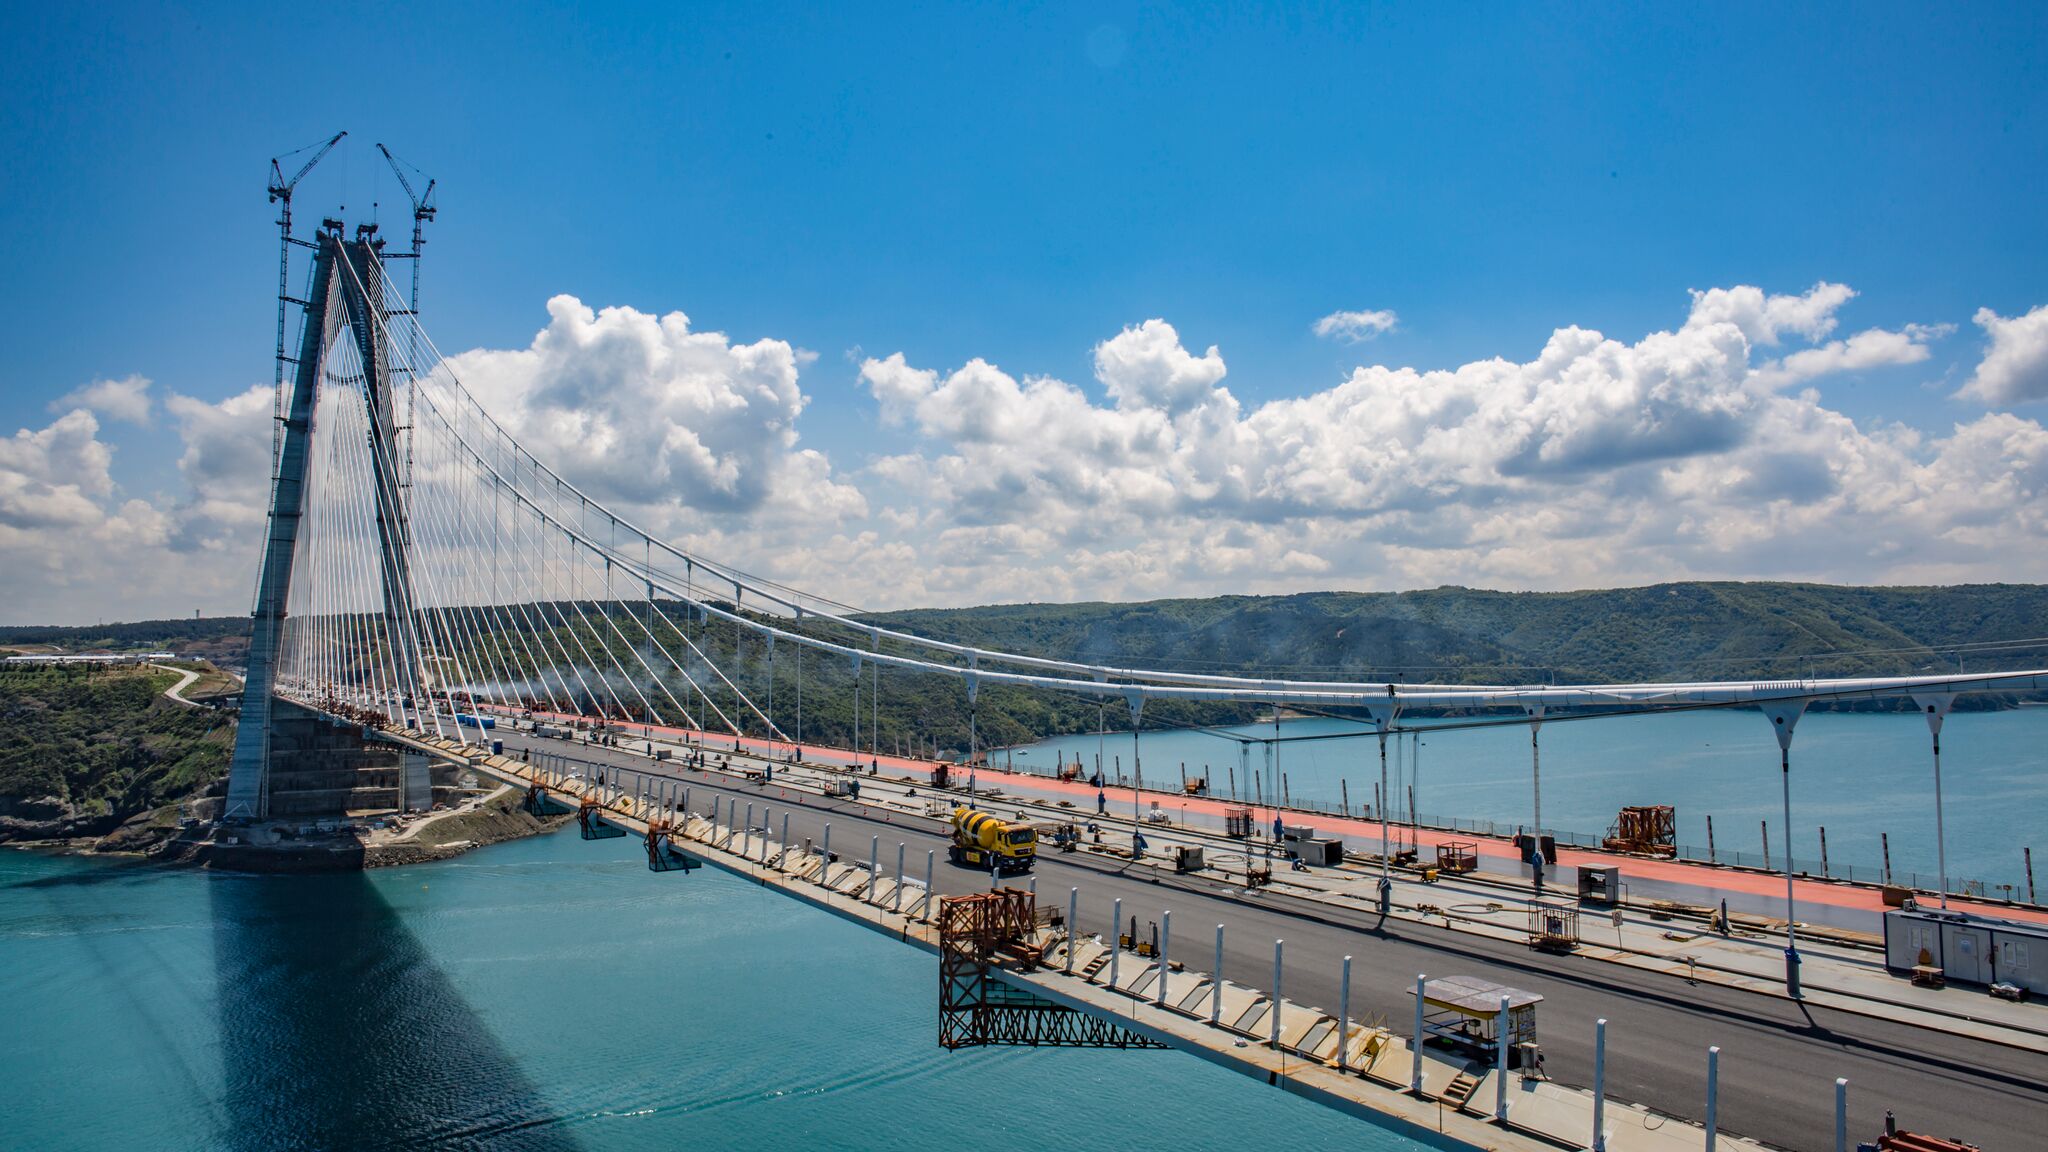 Second place: 3rd Bosphorus Project, Istanbul, Turkey